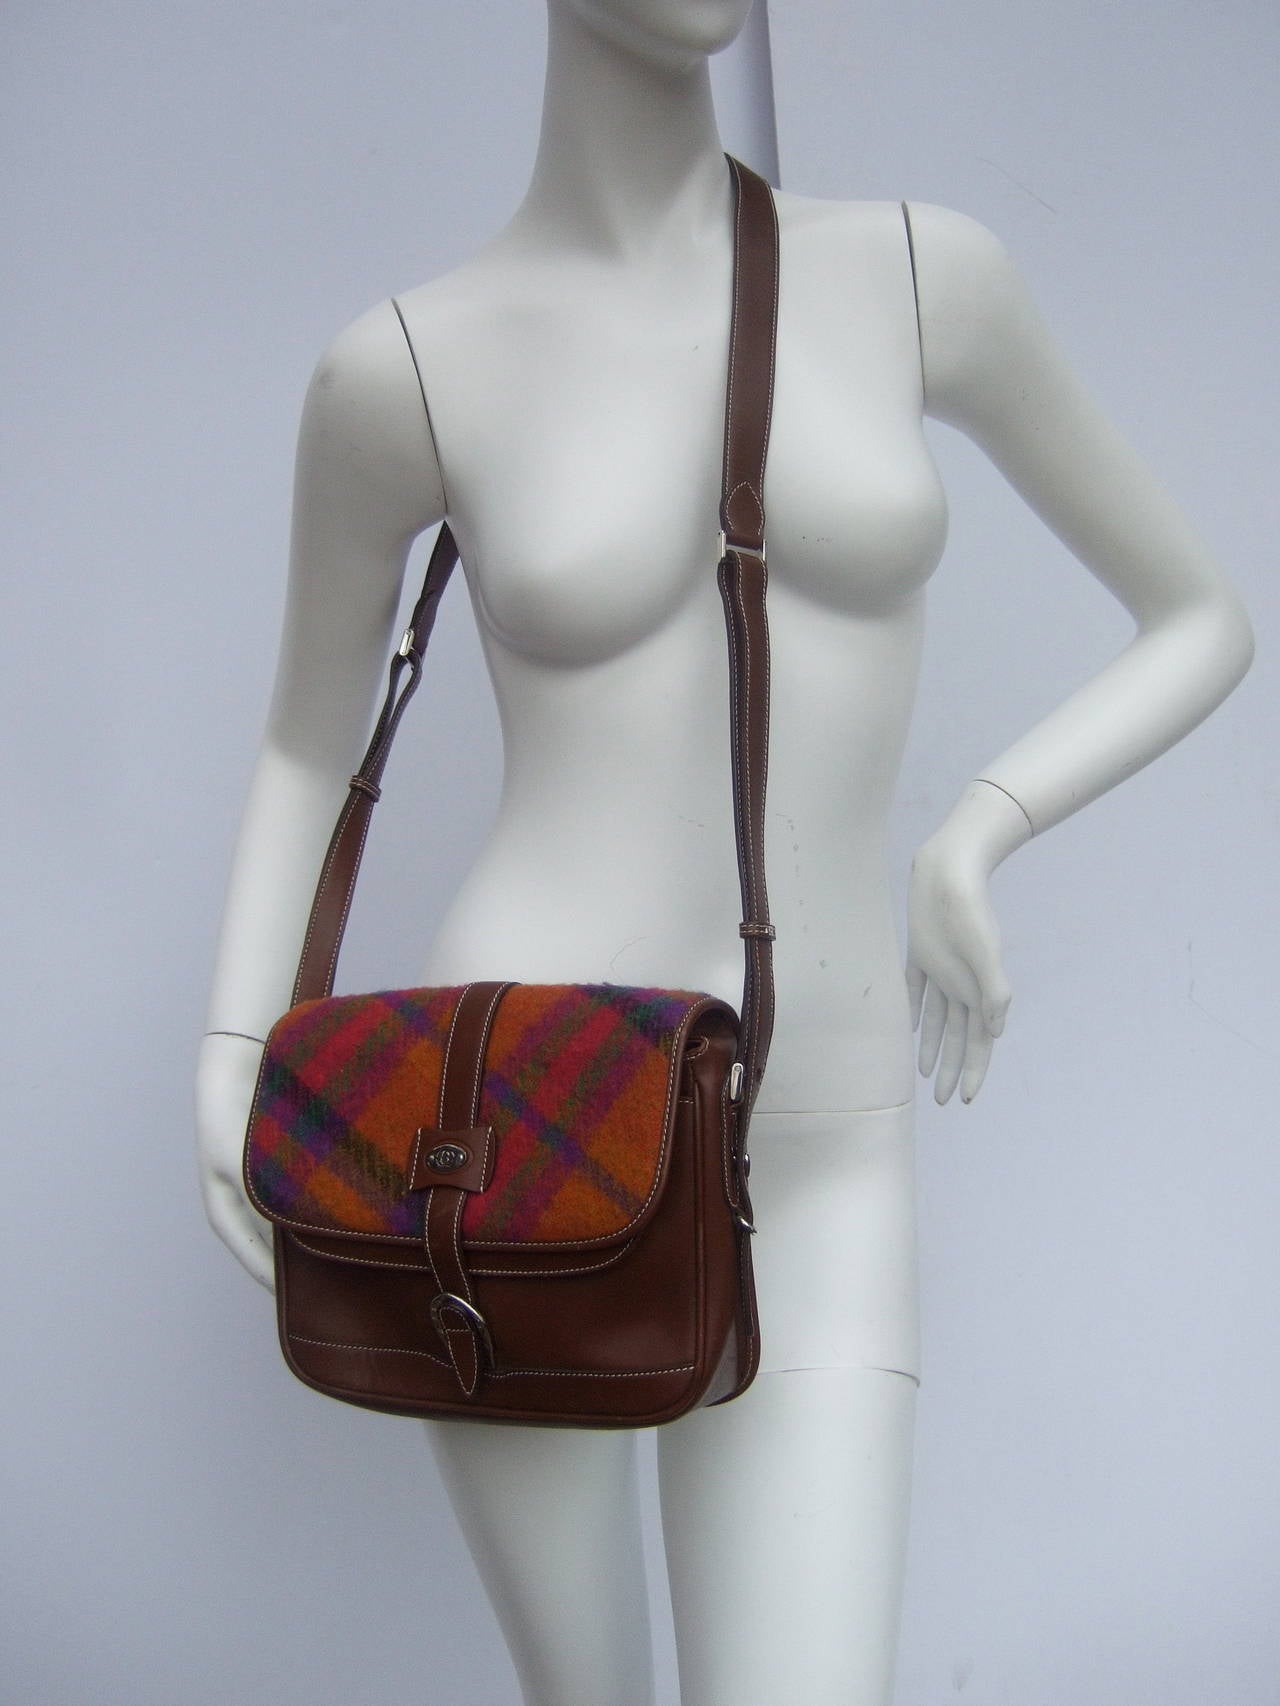 Women's Gucci Italy Plaid Wool Brown Leather Shoulder Bag c 1980